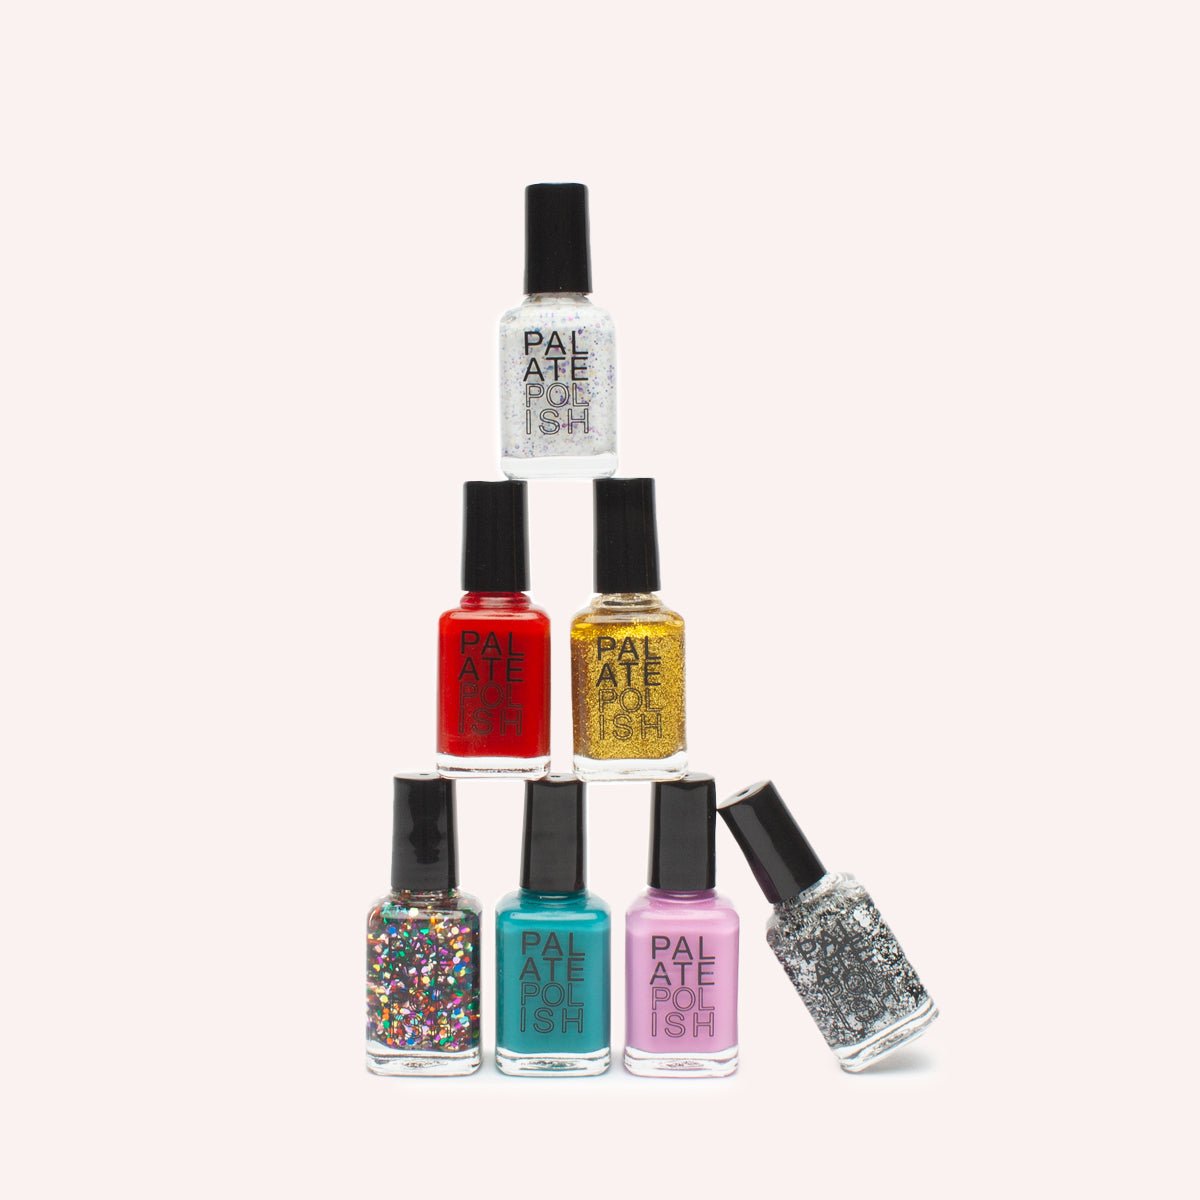 A pyramid of nail polish bottles in various colors. From bottom starting left to right: Gumball, Blue Raspberry, Cherry Blossom, Cookies and Cream, Hot Sauce, Gold Gumdrop, and Jawbreaker. All are vegan and 10-Free (almost non-toxic).